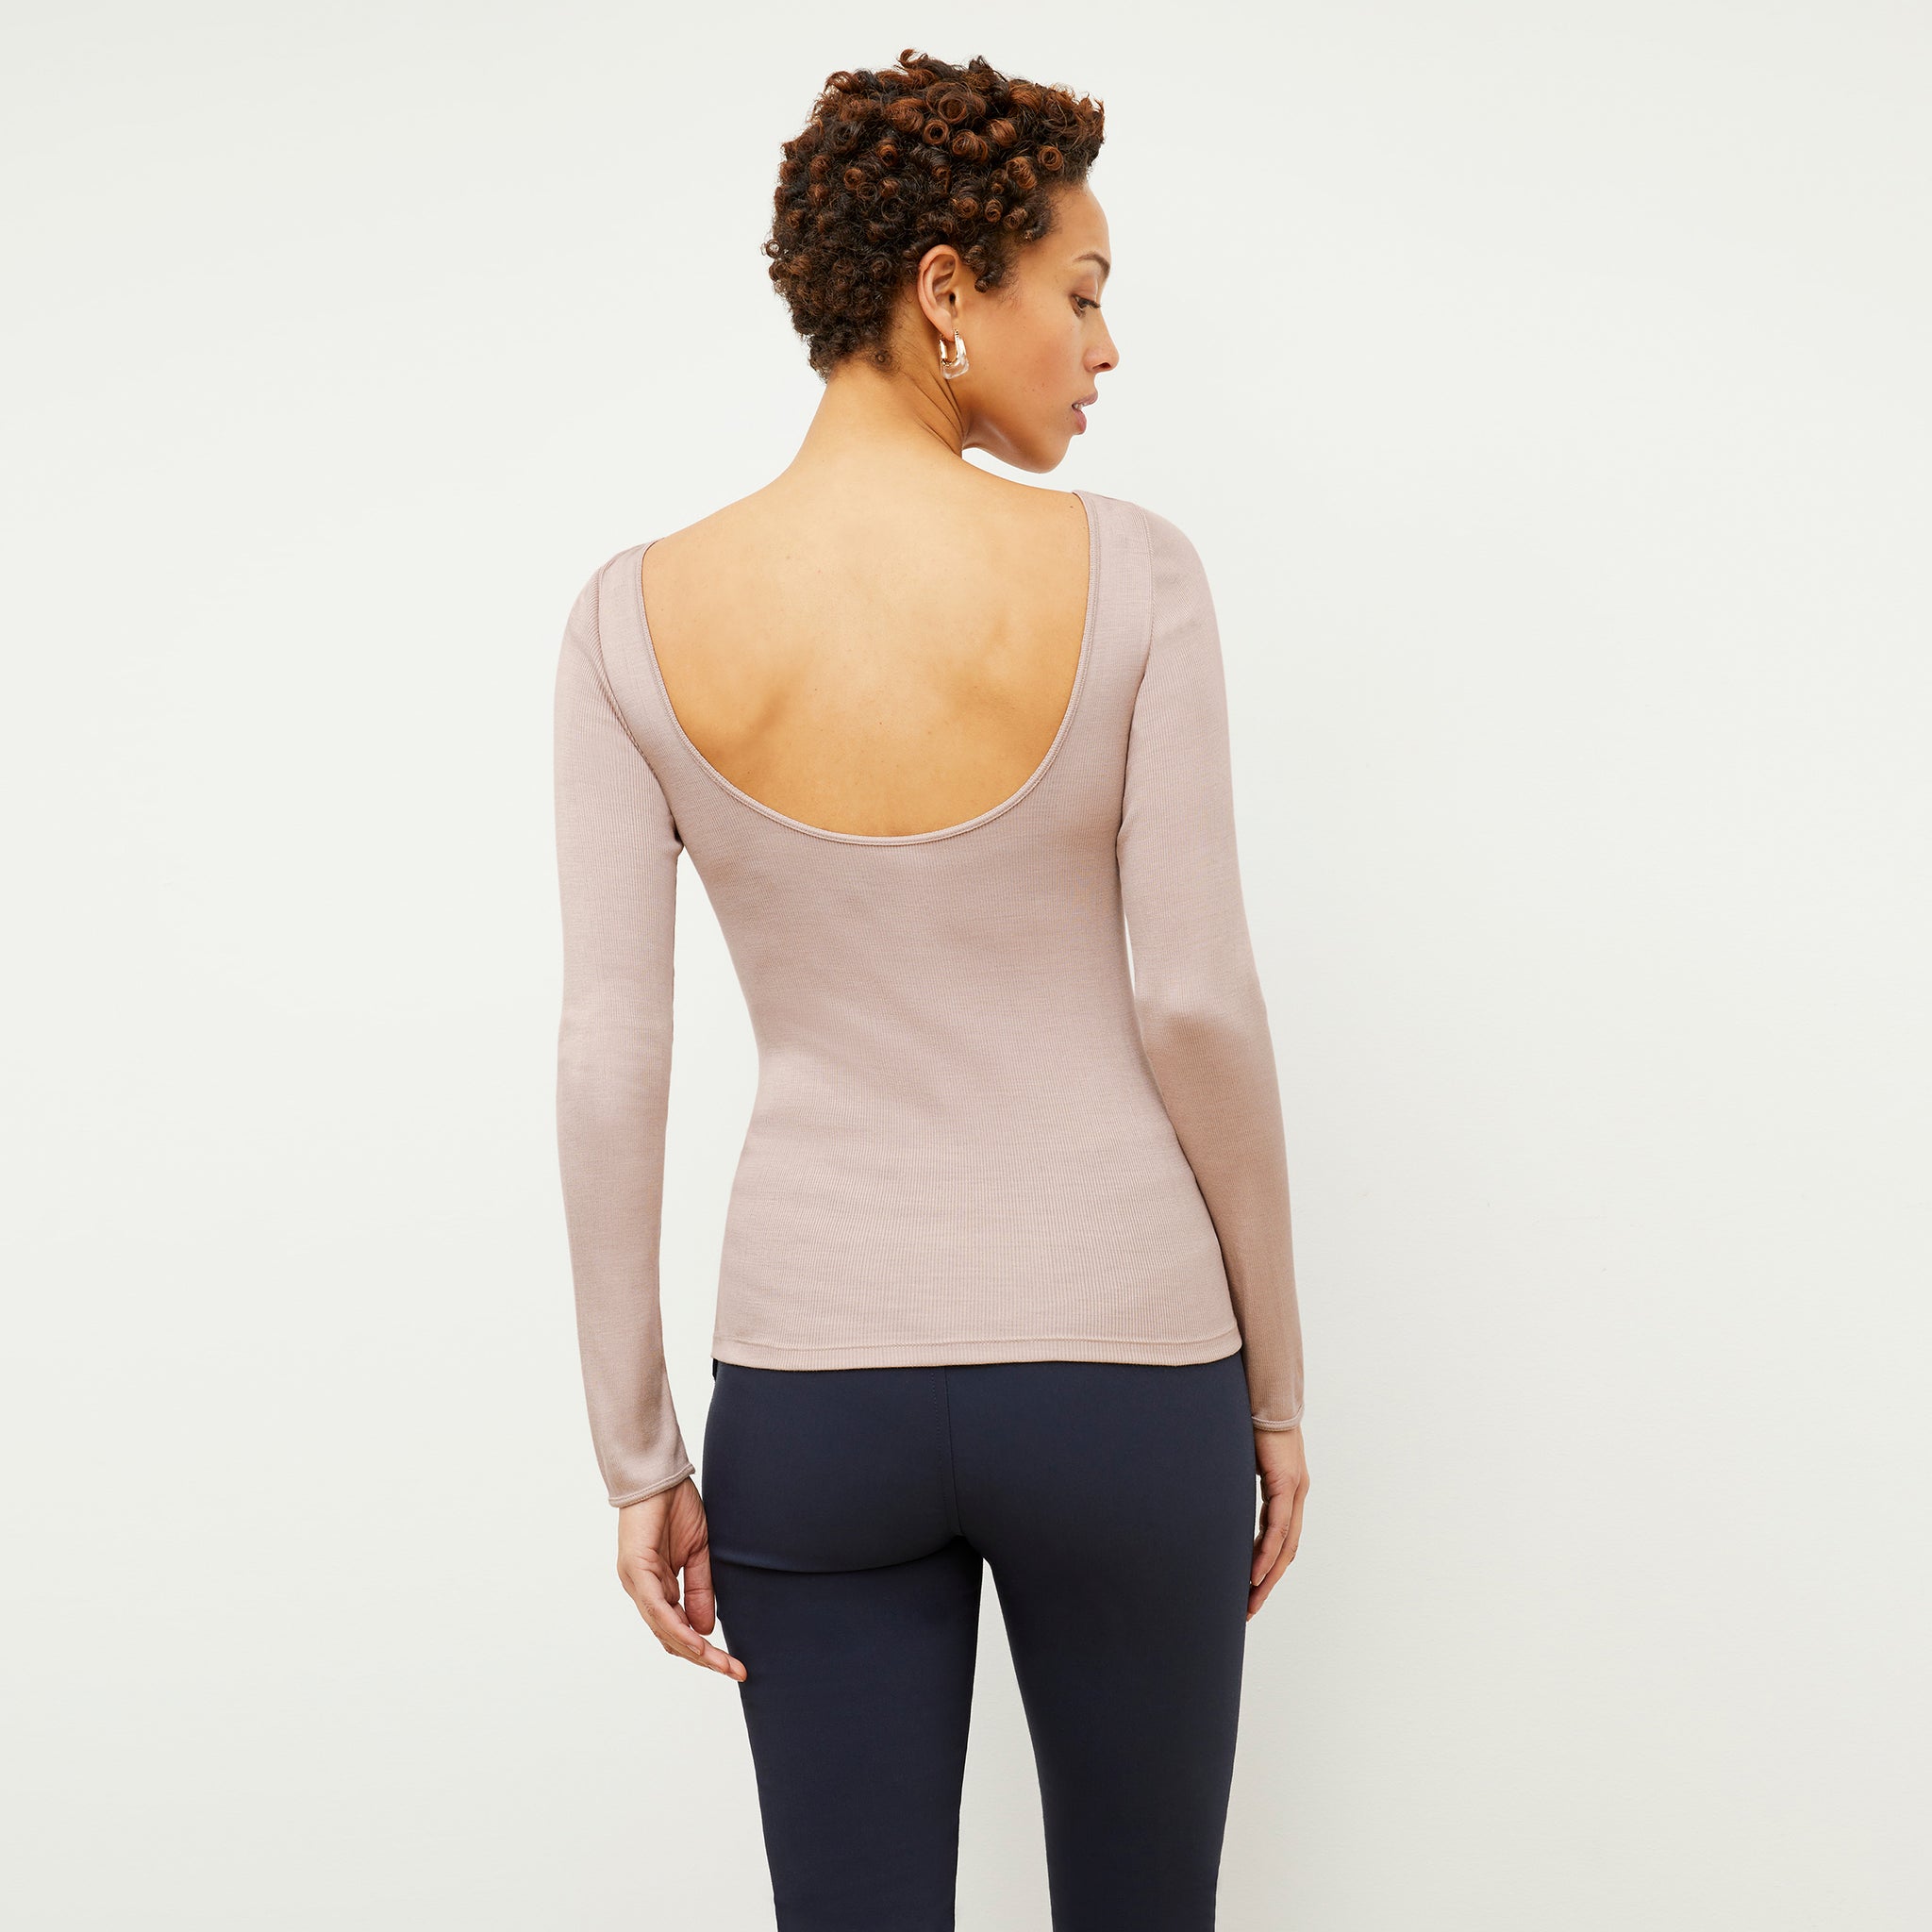 Back image of a woman wearing the Meg Top in Blush